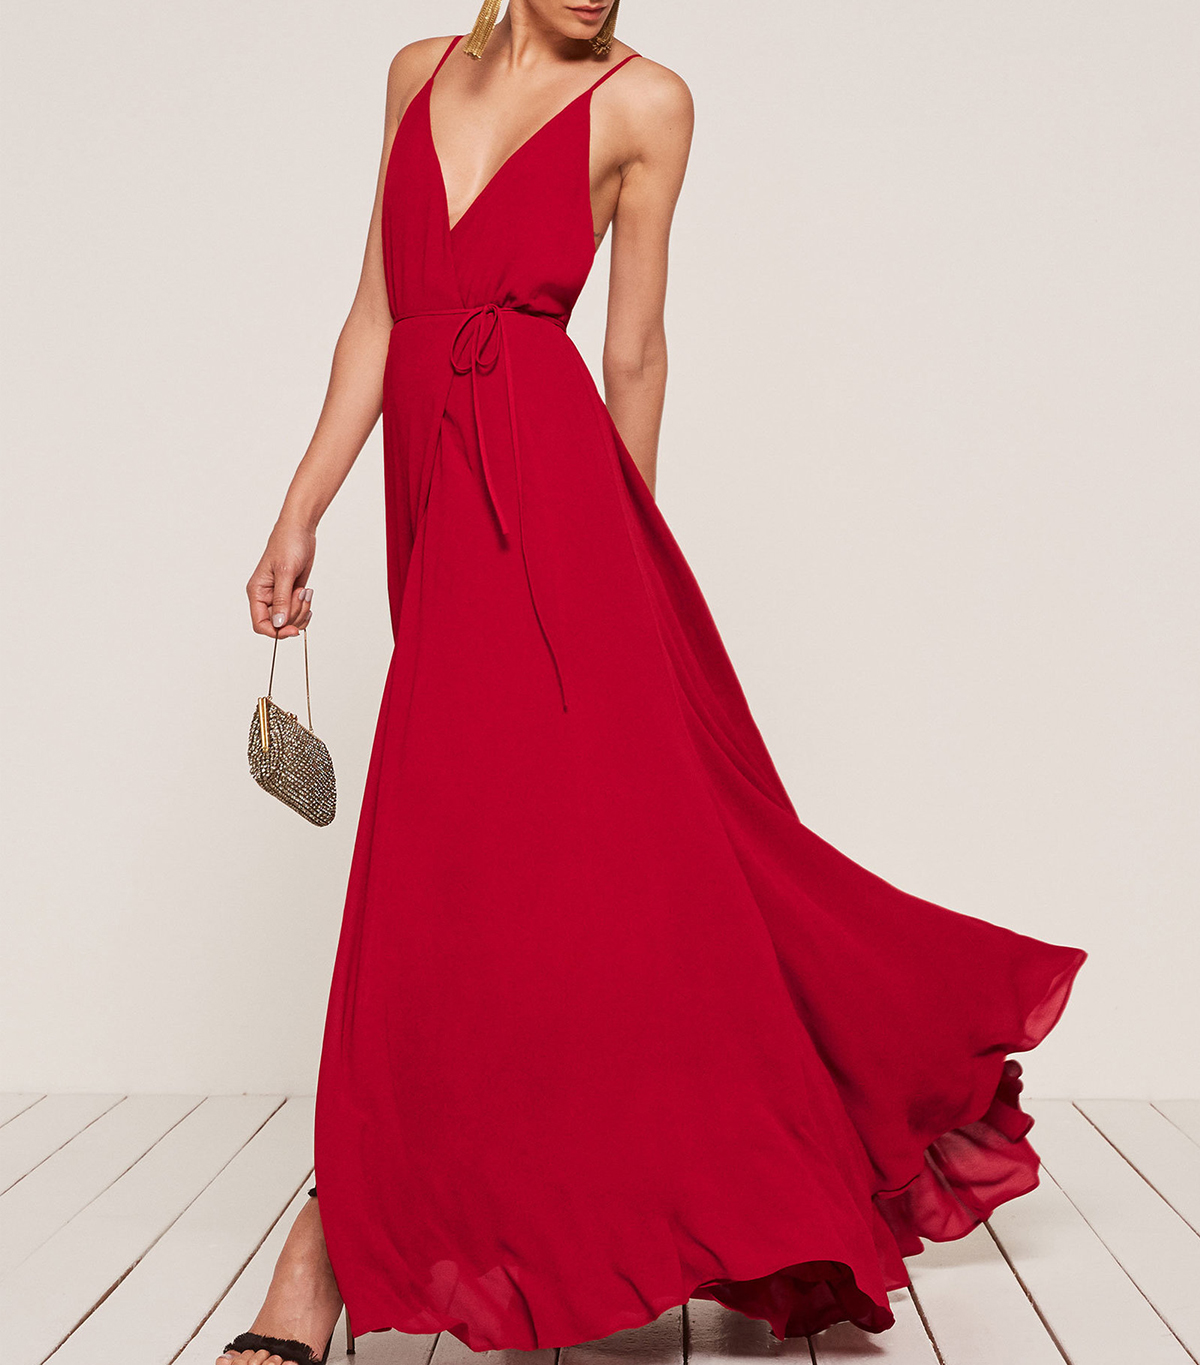 Red Dress Wedding Outfit Online Sale ...